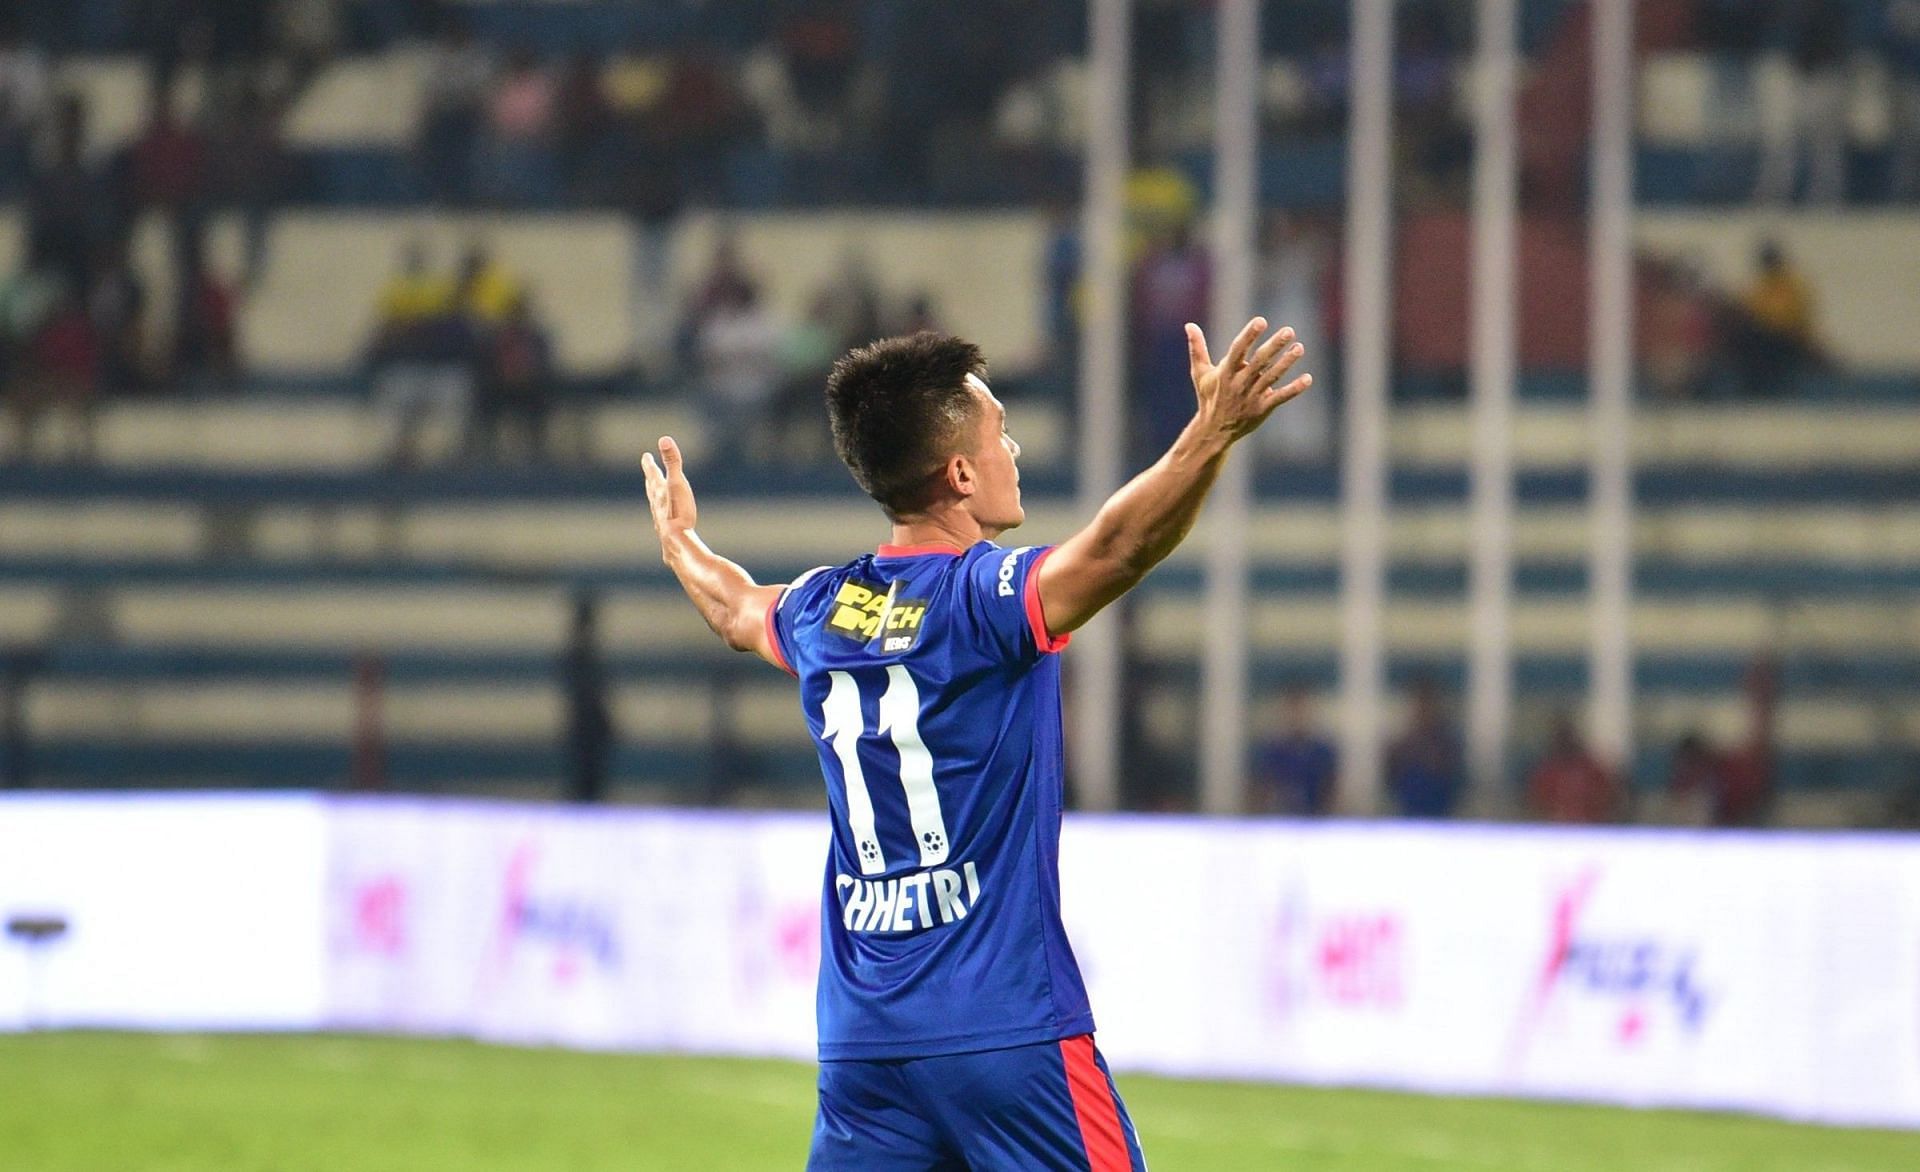 Sunil Chhetri and his wife was the target of a lot of vile comments on social media.